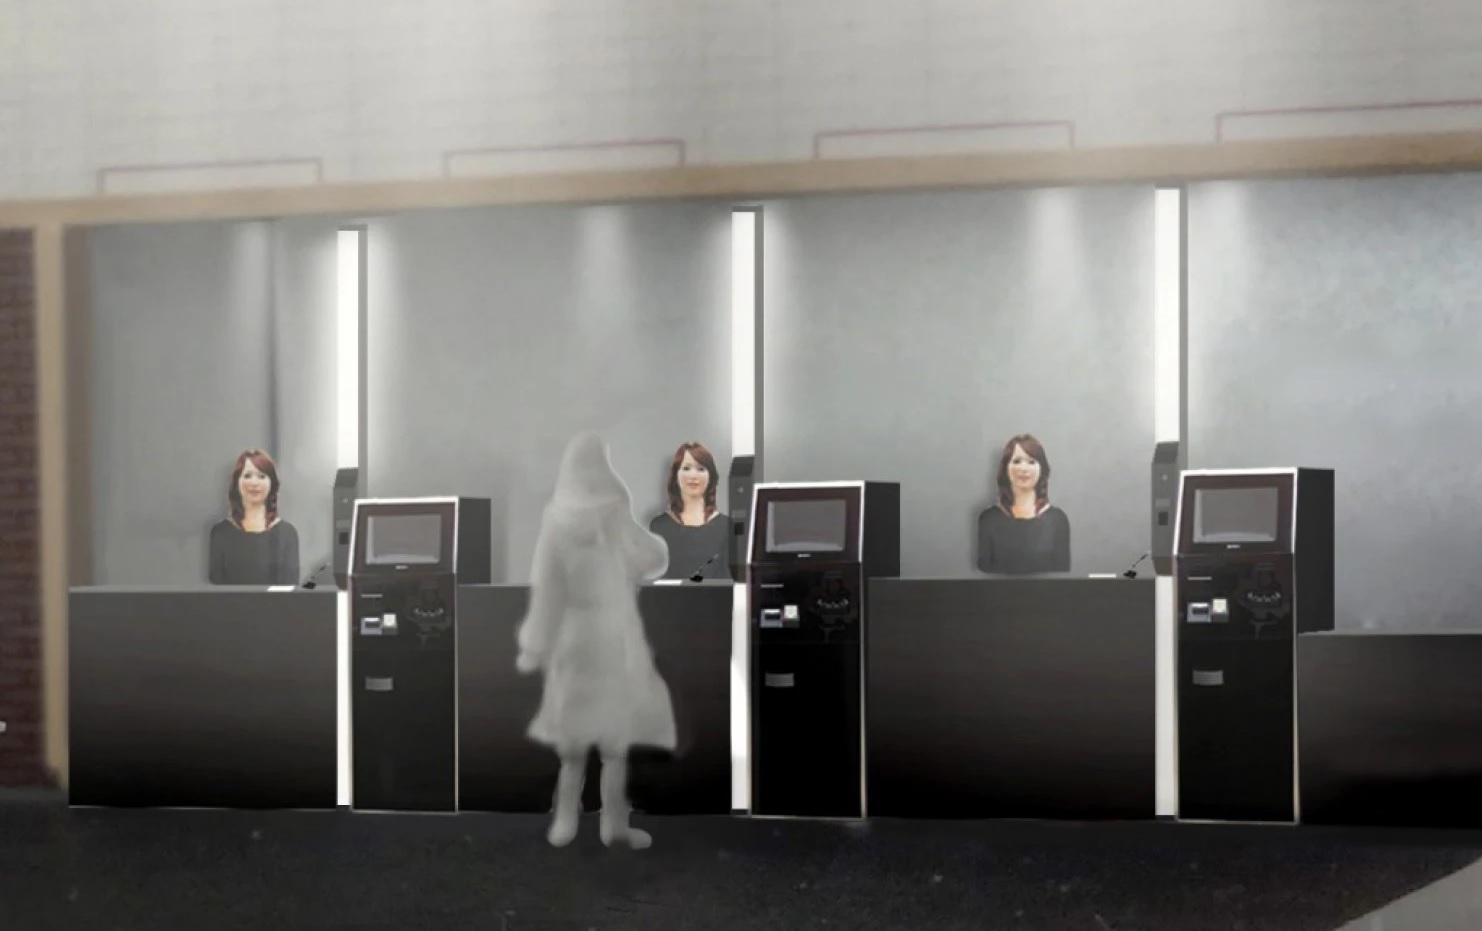 Hotel staffed by humanoid robots set to open in Japan this ...